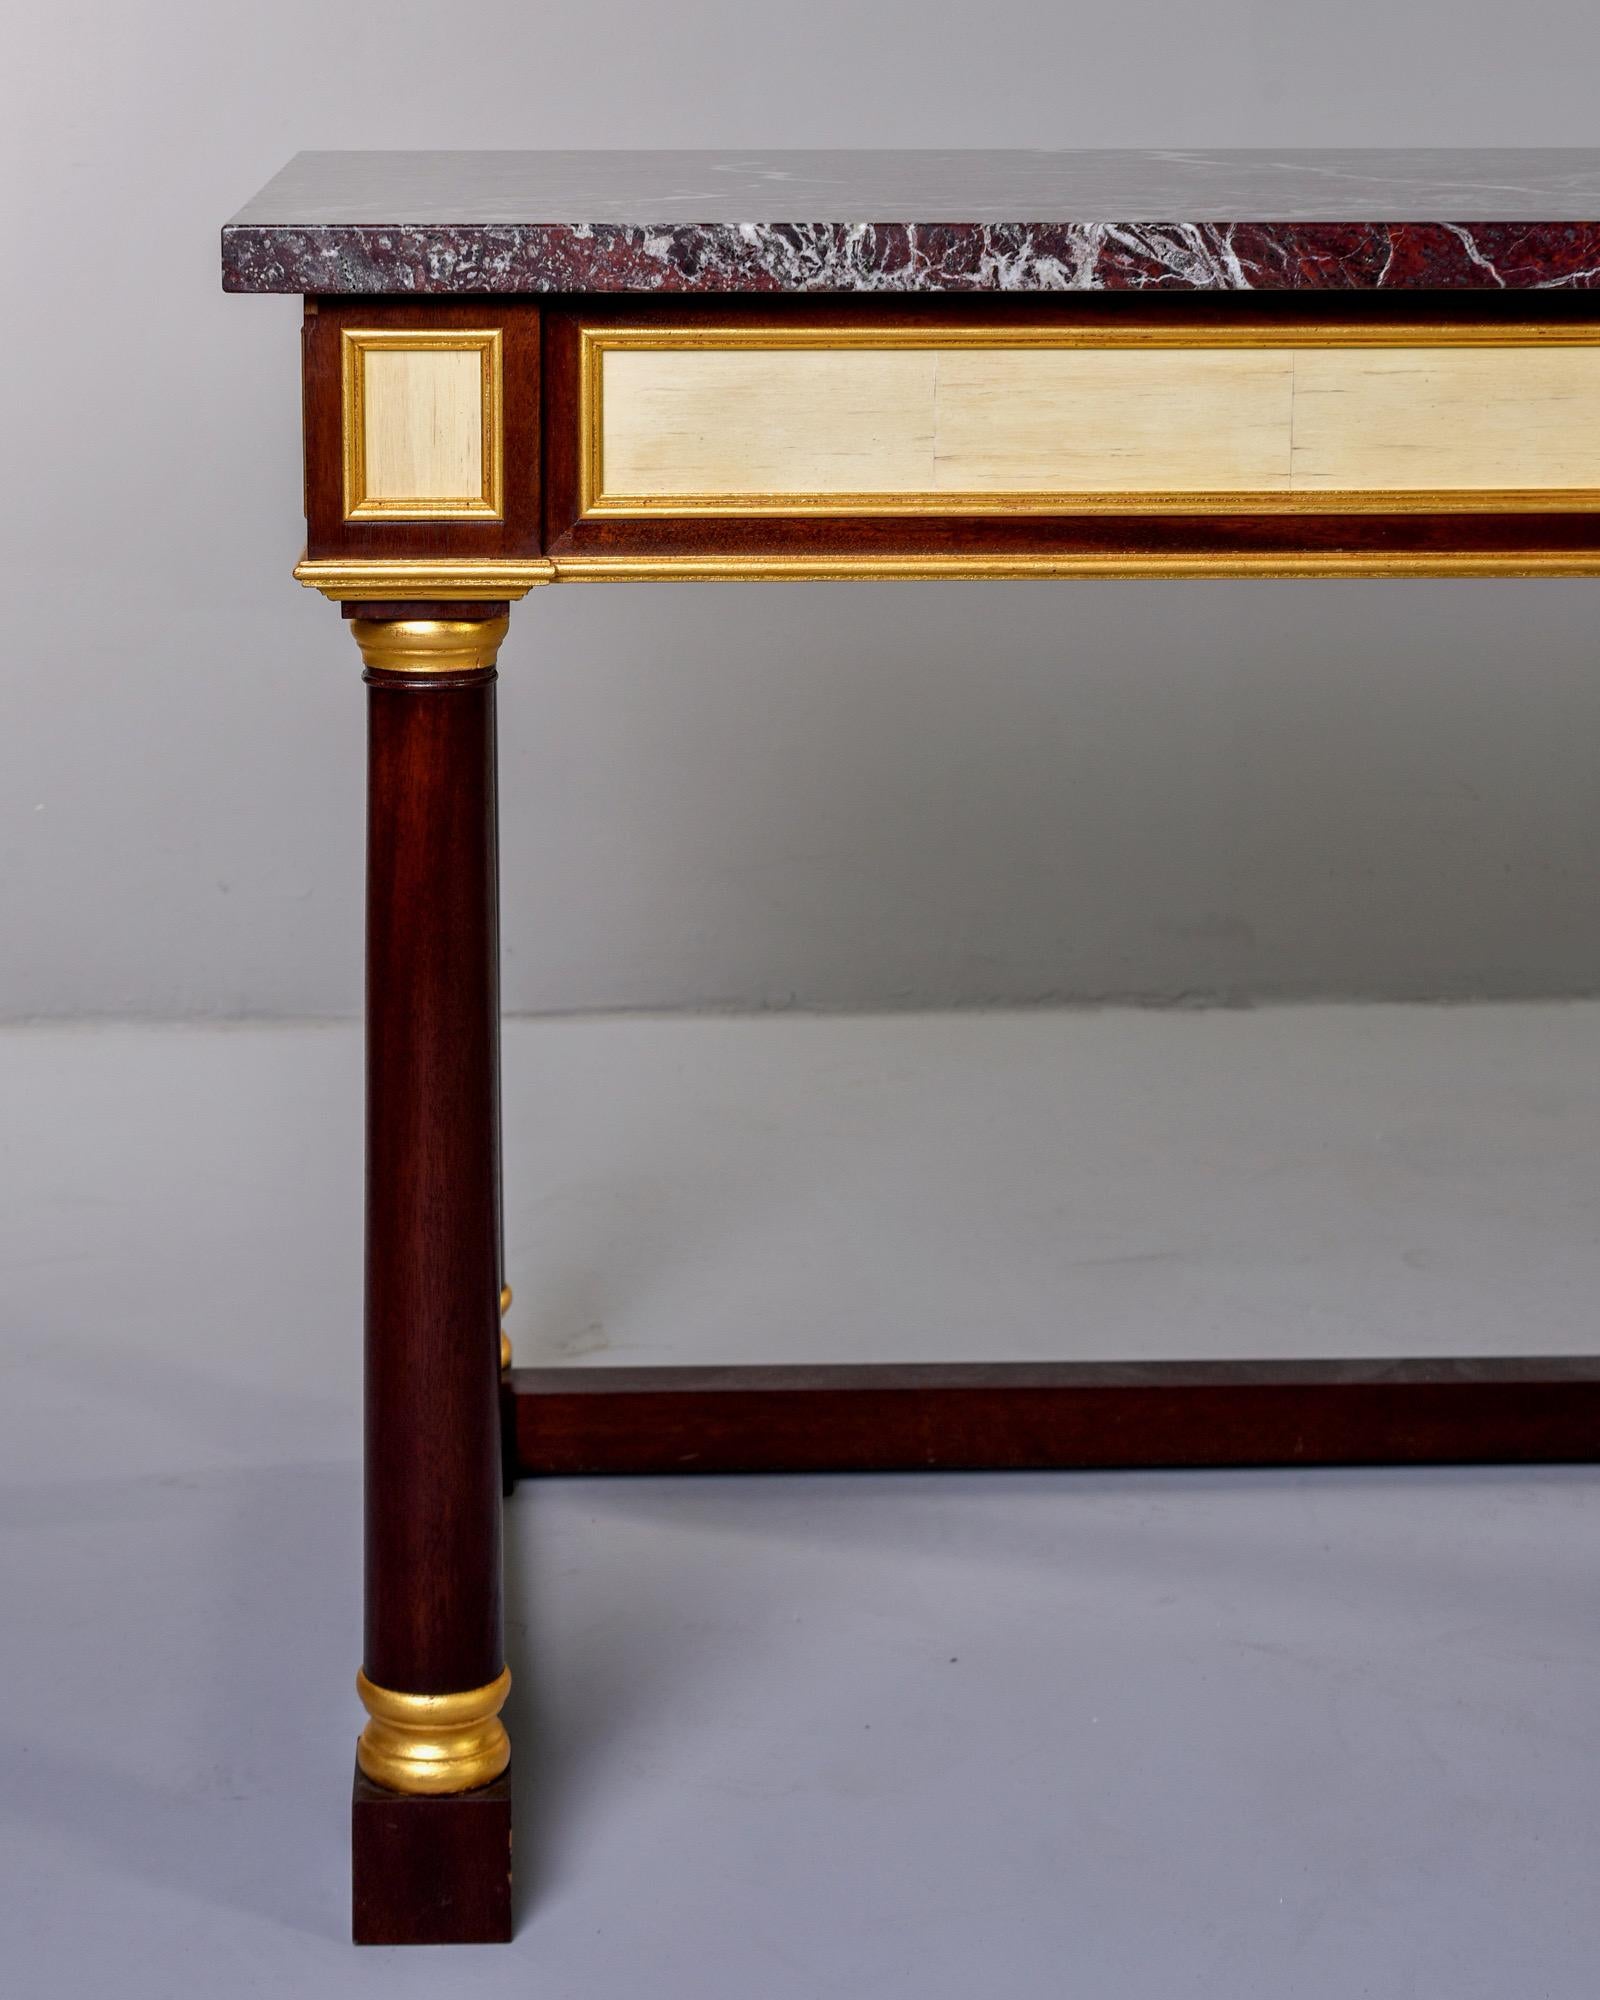 North American Bespoke Mahogany Neoclassical Style Console or Desk with Marble Top and Drawer